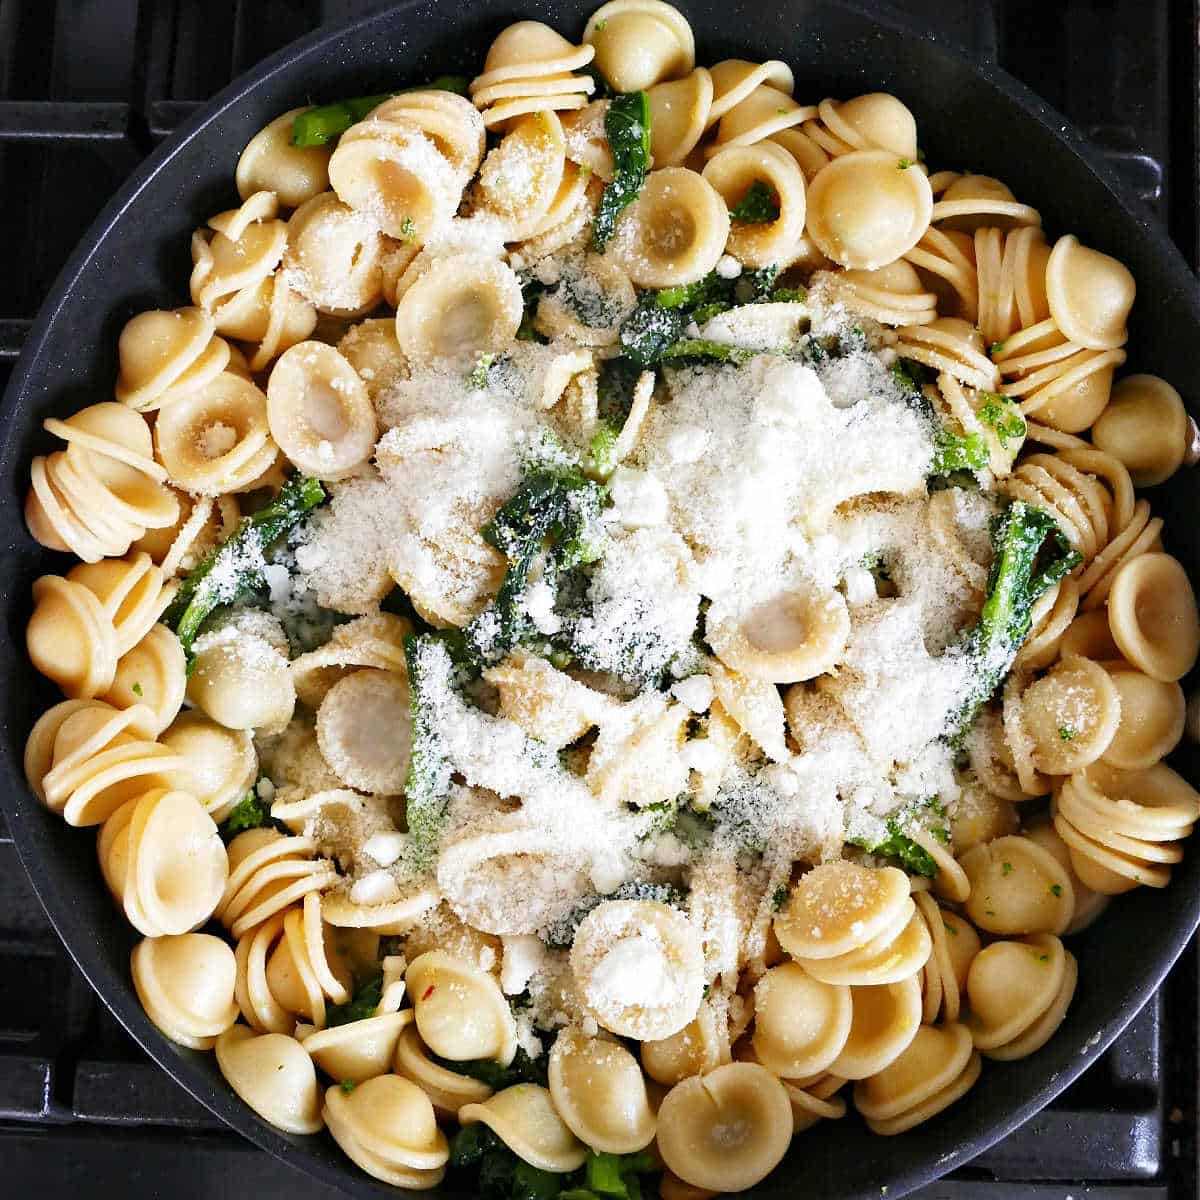 orecchiette pasta mixed with broccoli rabe and grated cheese in a skillet